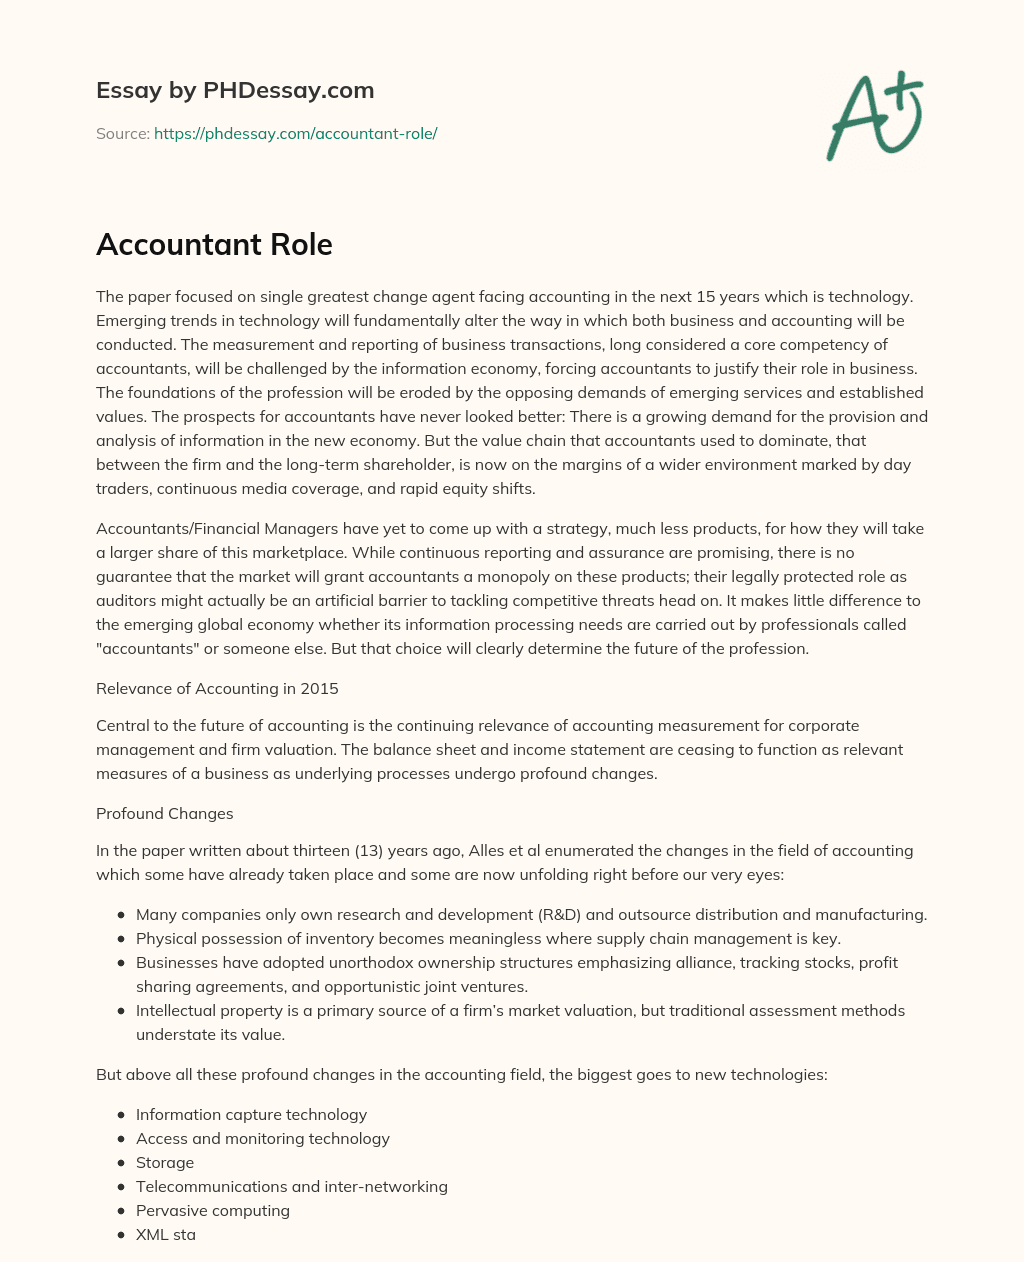 accountant role essay